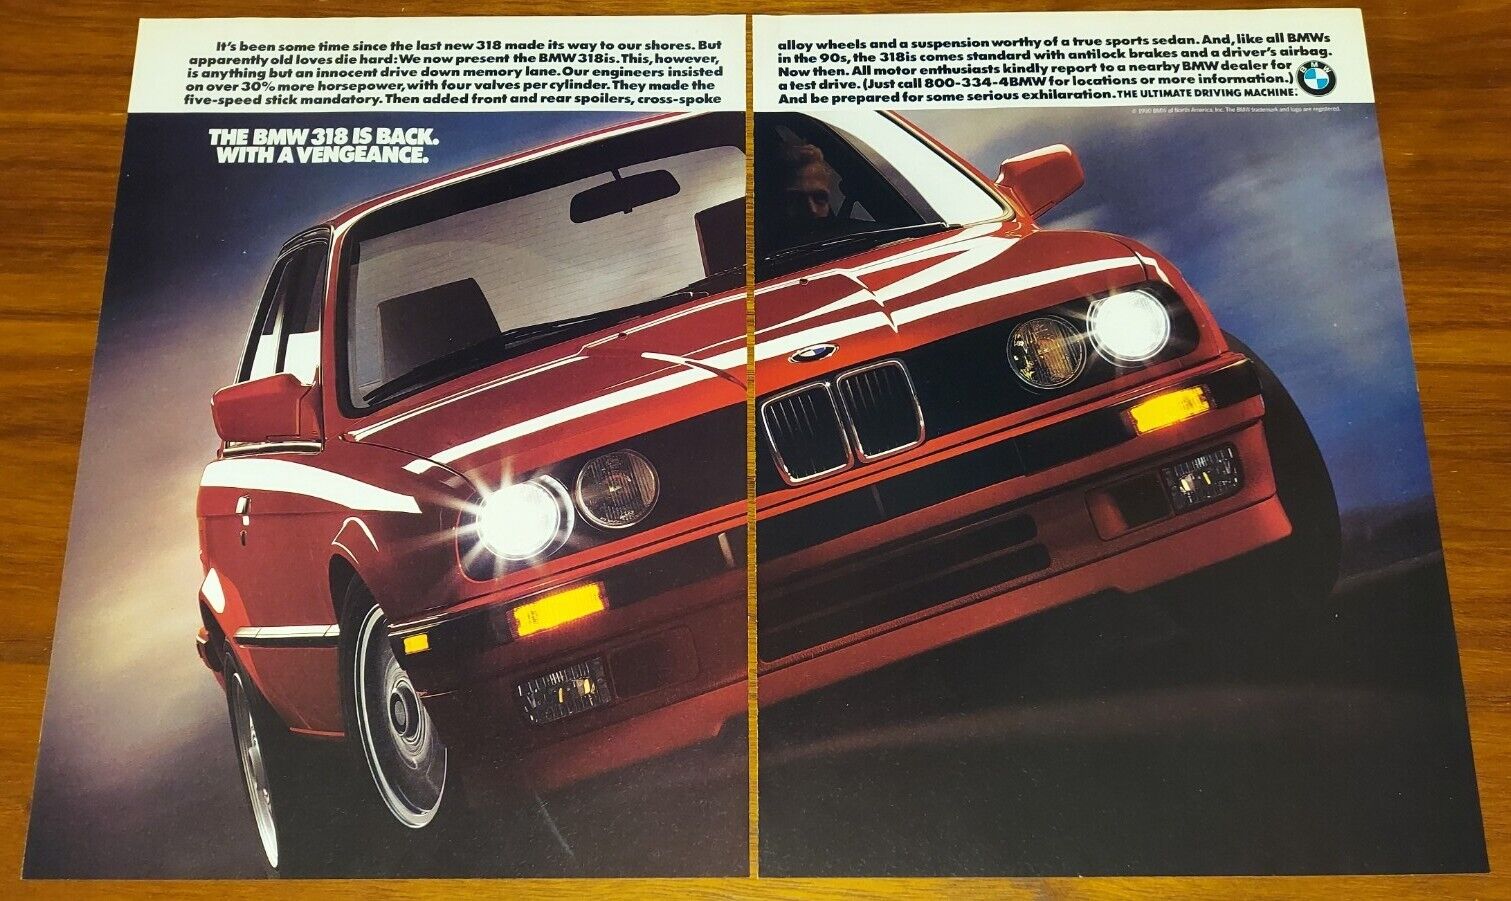 BMW 318is MAGAZINE ADVERTISEMENT PRINT AD E30 3 SERIES BACK WITH A VENGEANCE